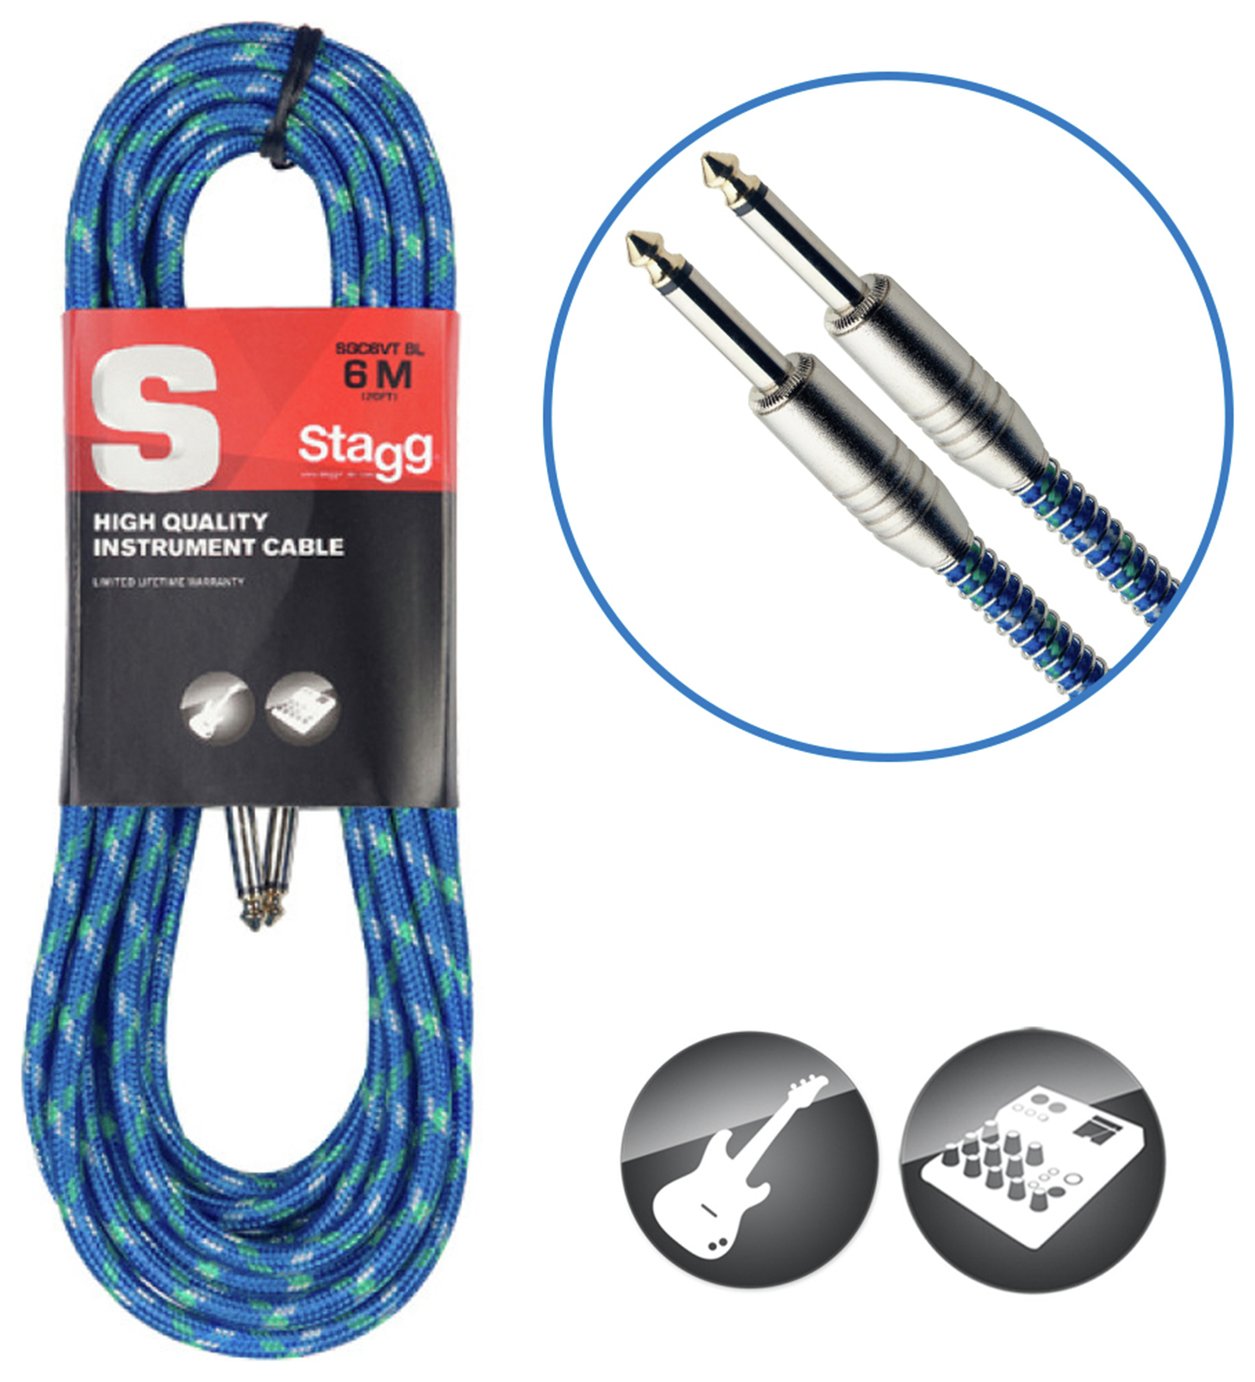 Stagg Tweed Guitar Cable Review